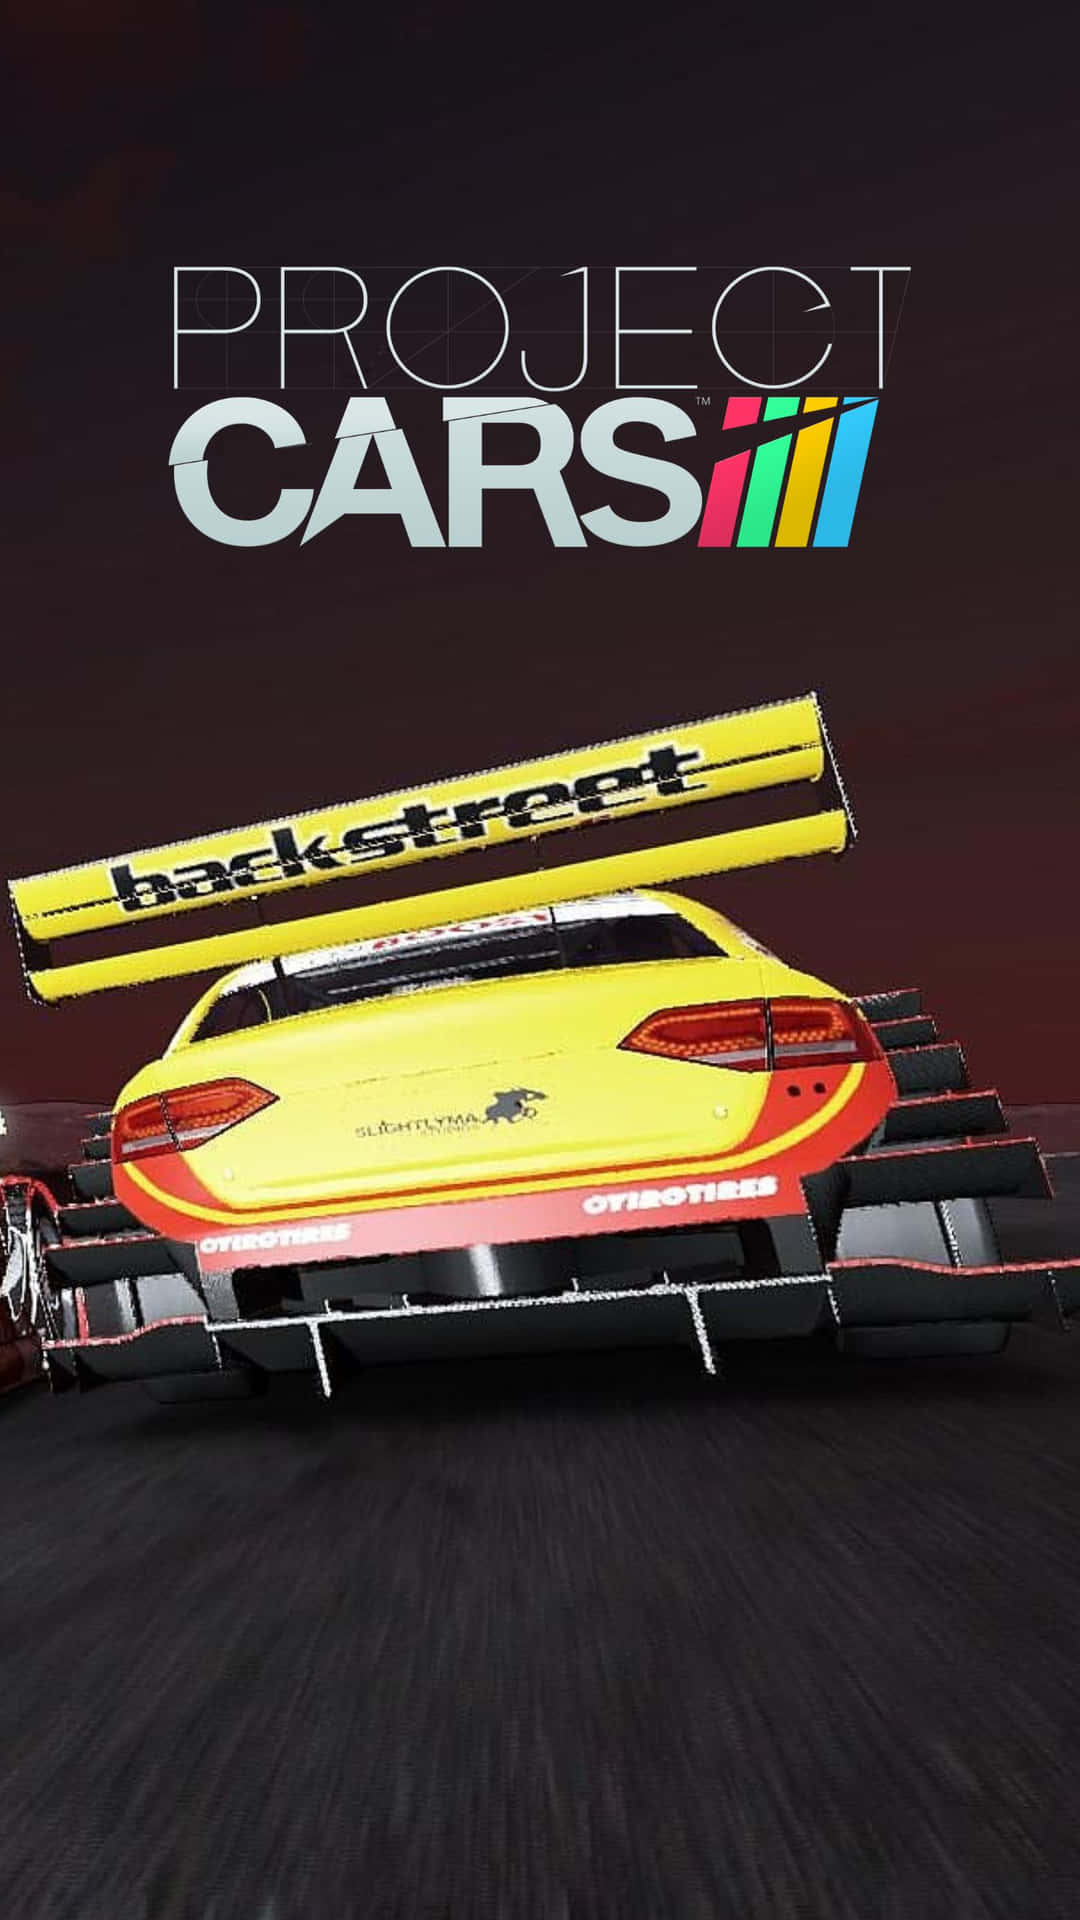 High-quality 3D racing graphics powered by Android Project Cars